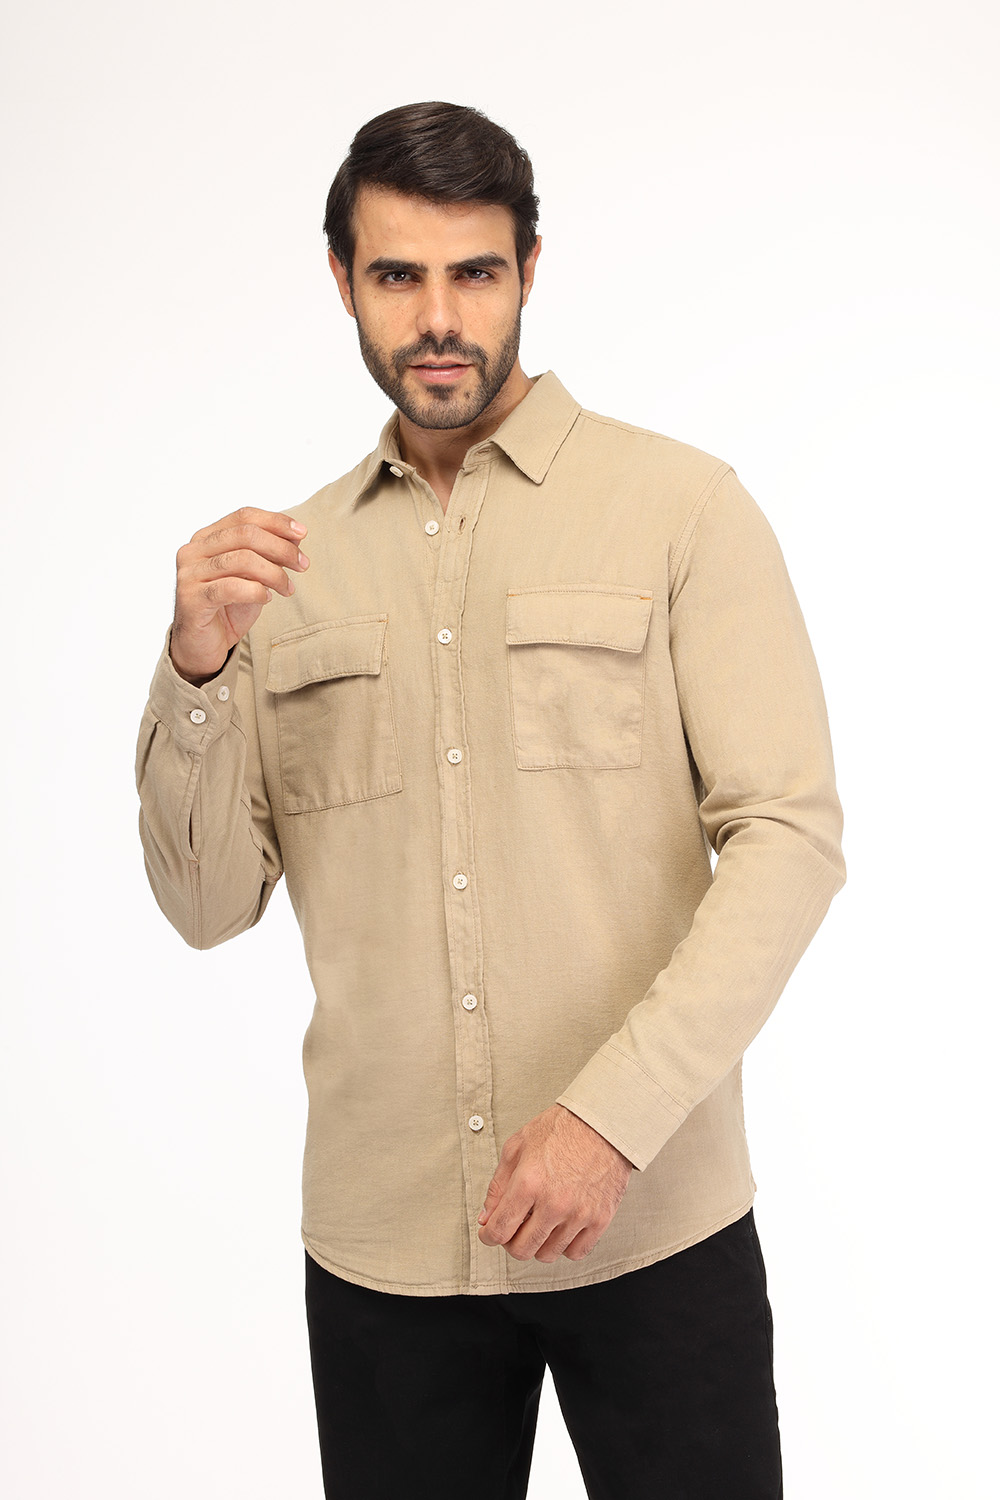 New Fit Shirt Beige - TIE HOUSE